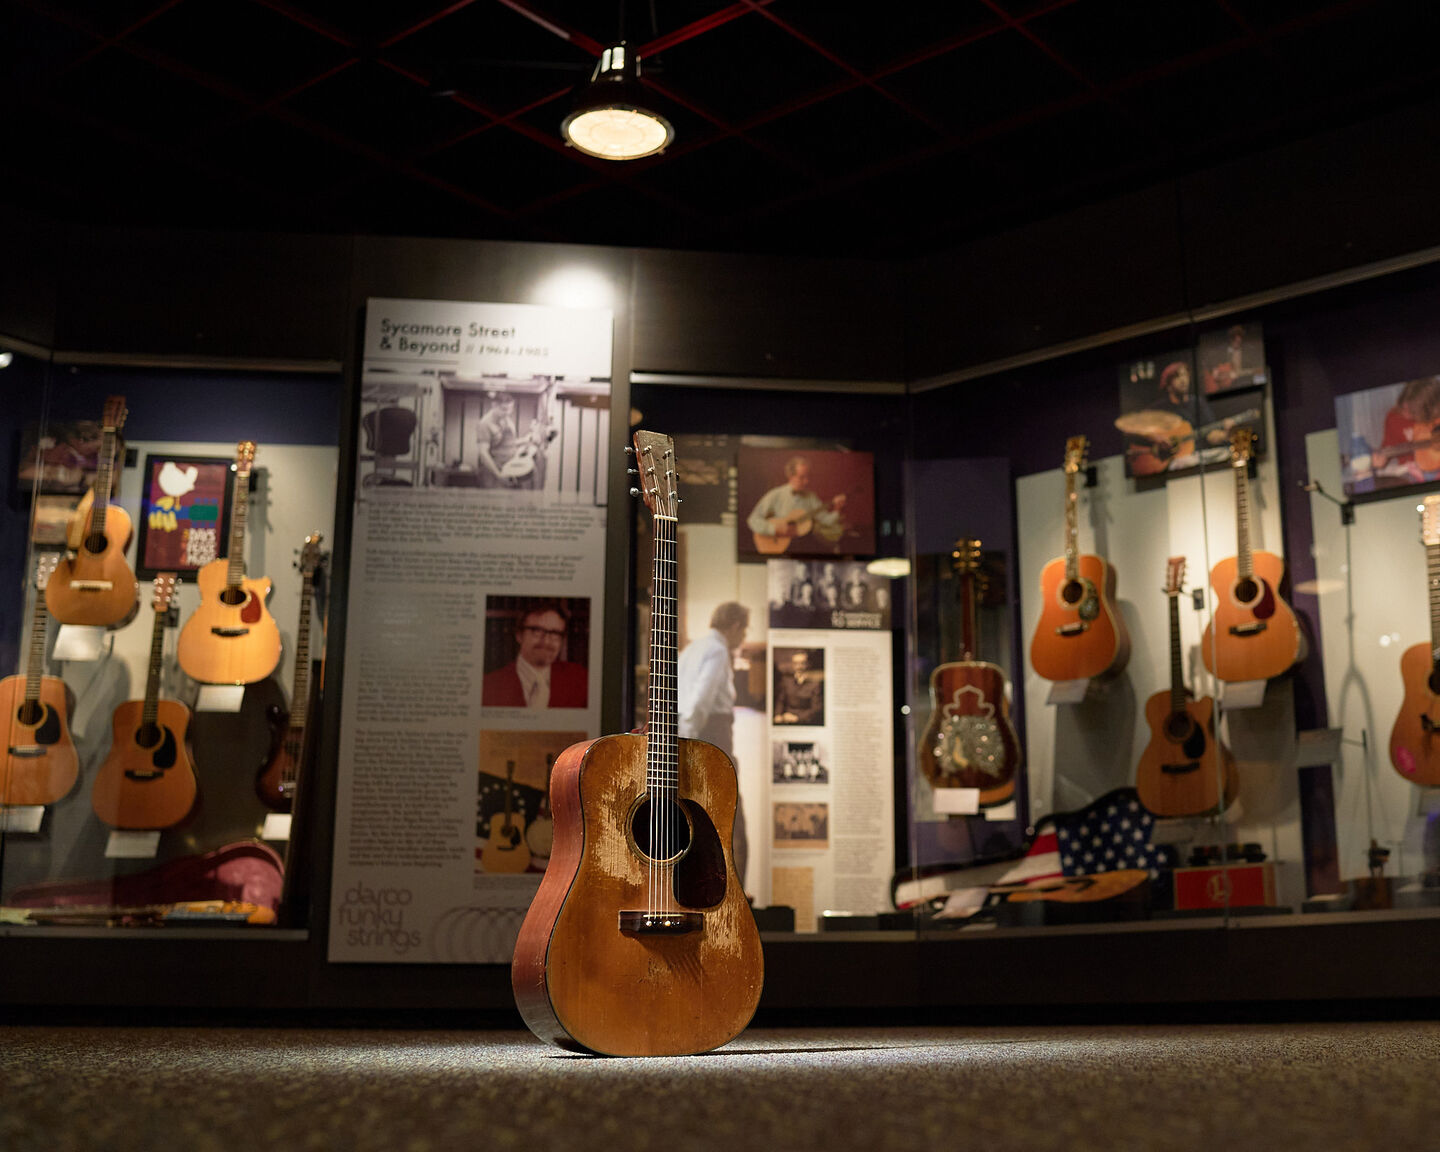 Shot of an acoustic guitar in a display